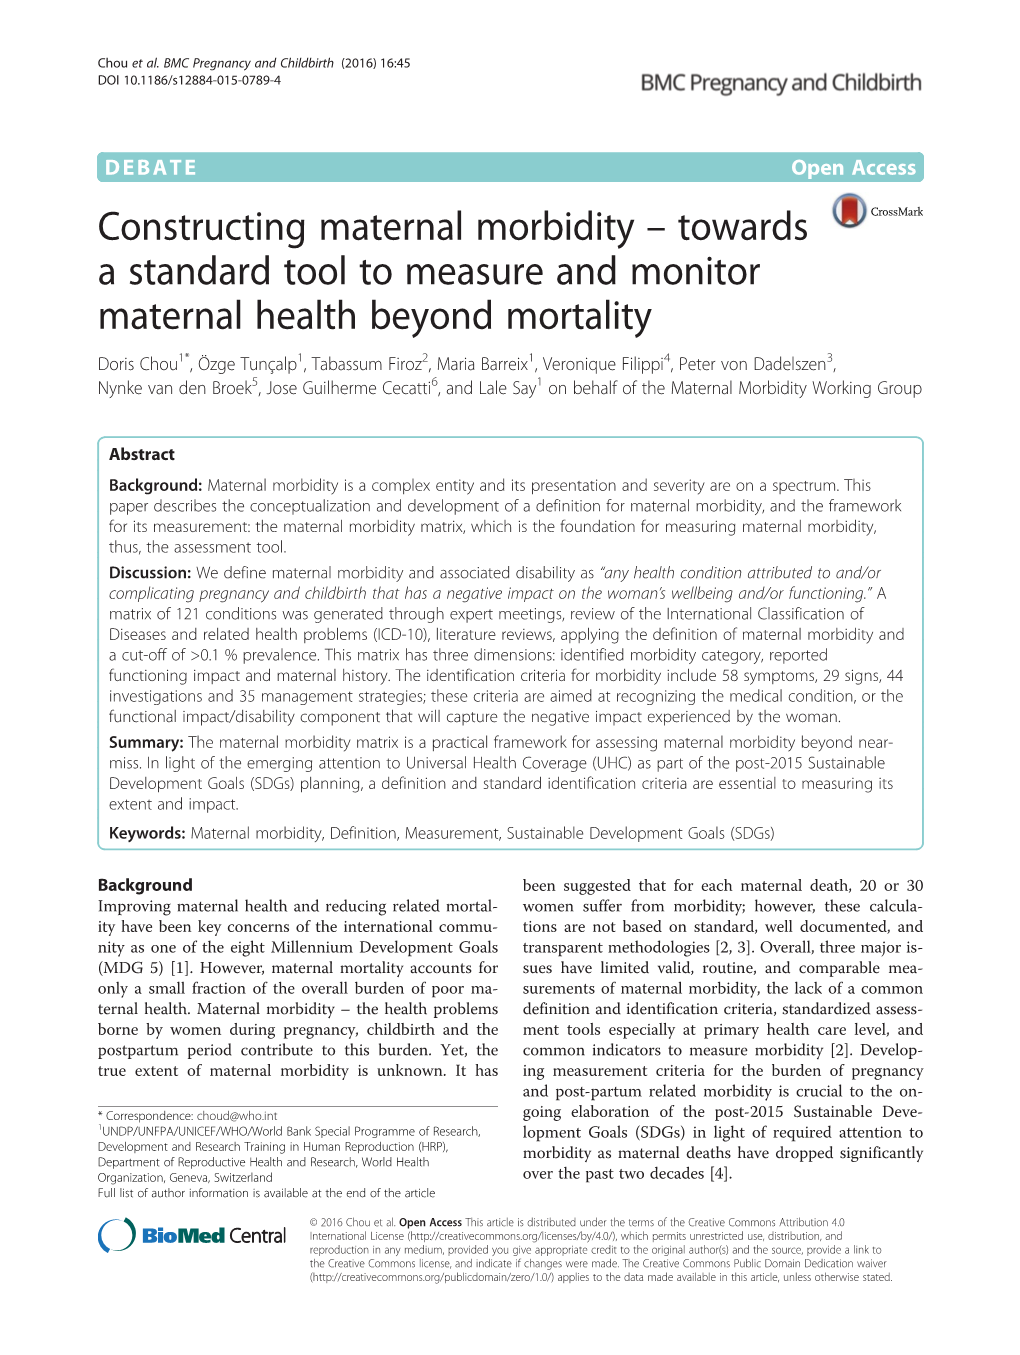 Constructing Maternal Morbidity – Towards a Standard Tool to Measure and Monitor Maternal Health Beyond Mortality